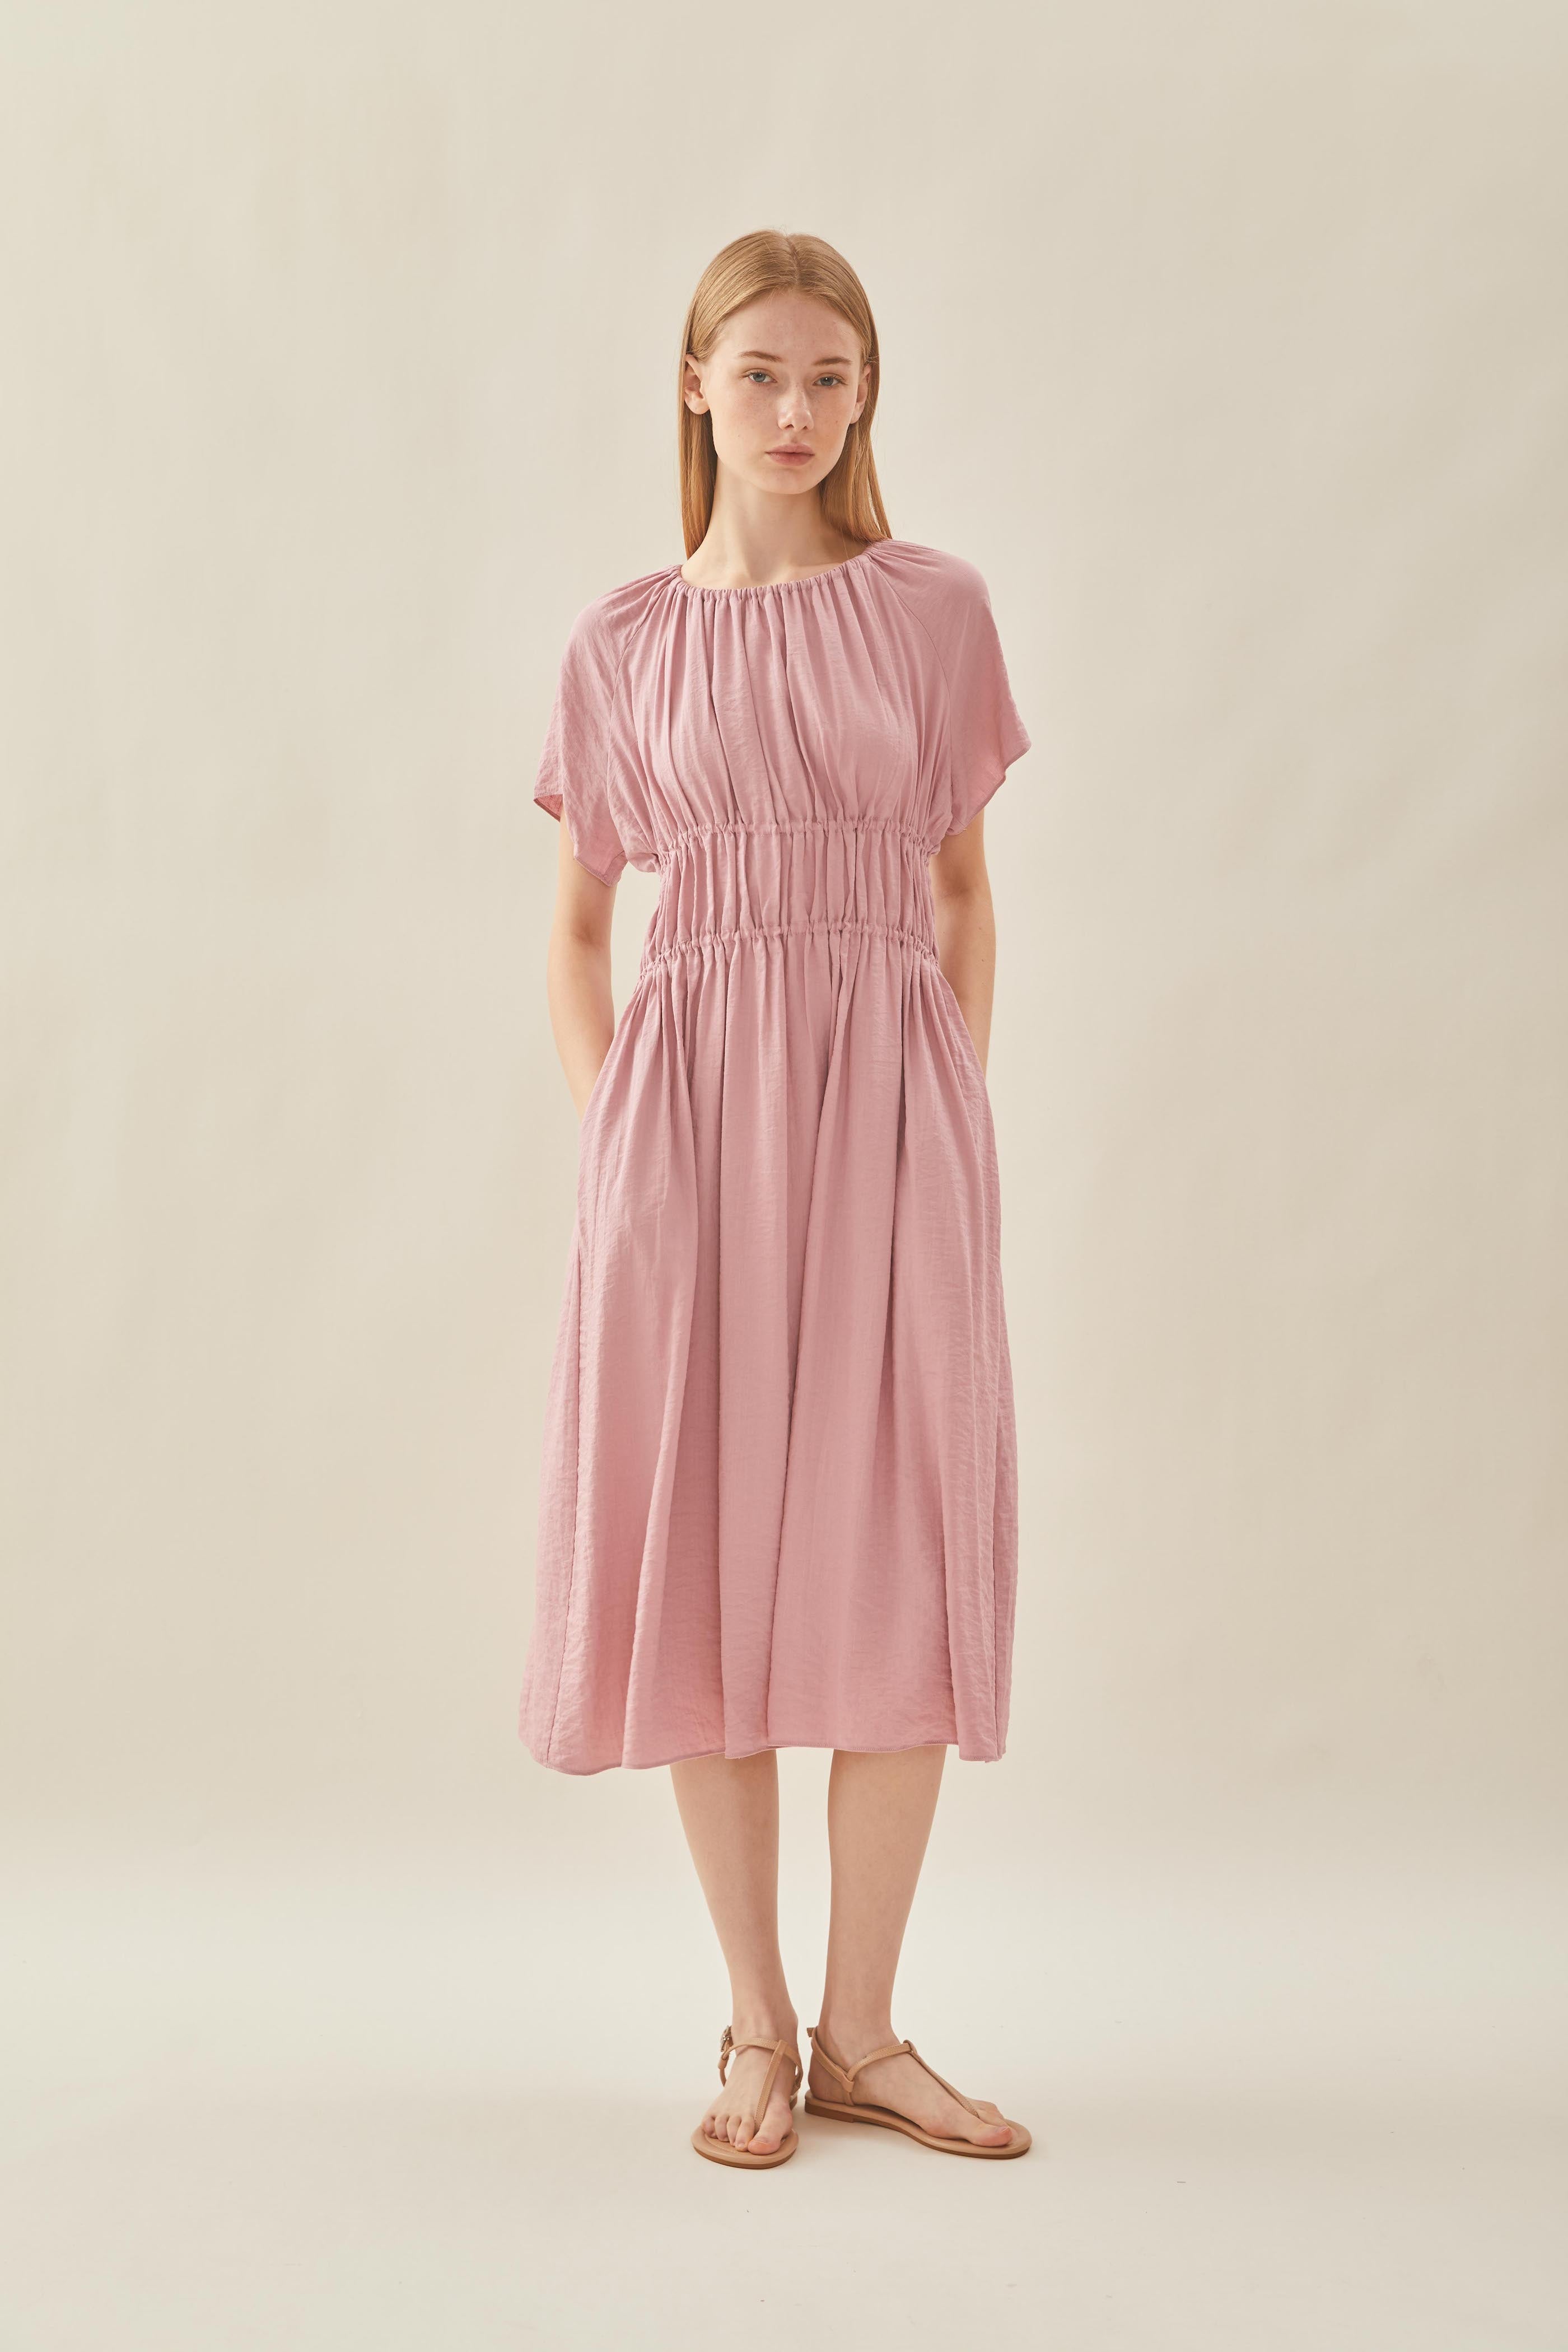 Ruched Waist Dress in Tea Rose